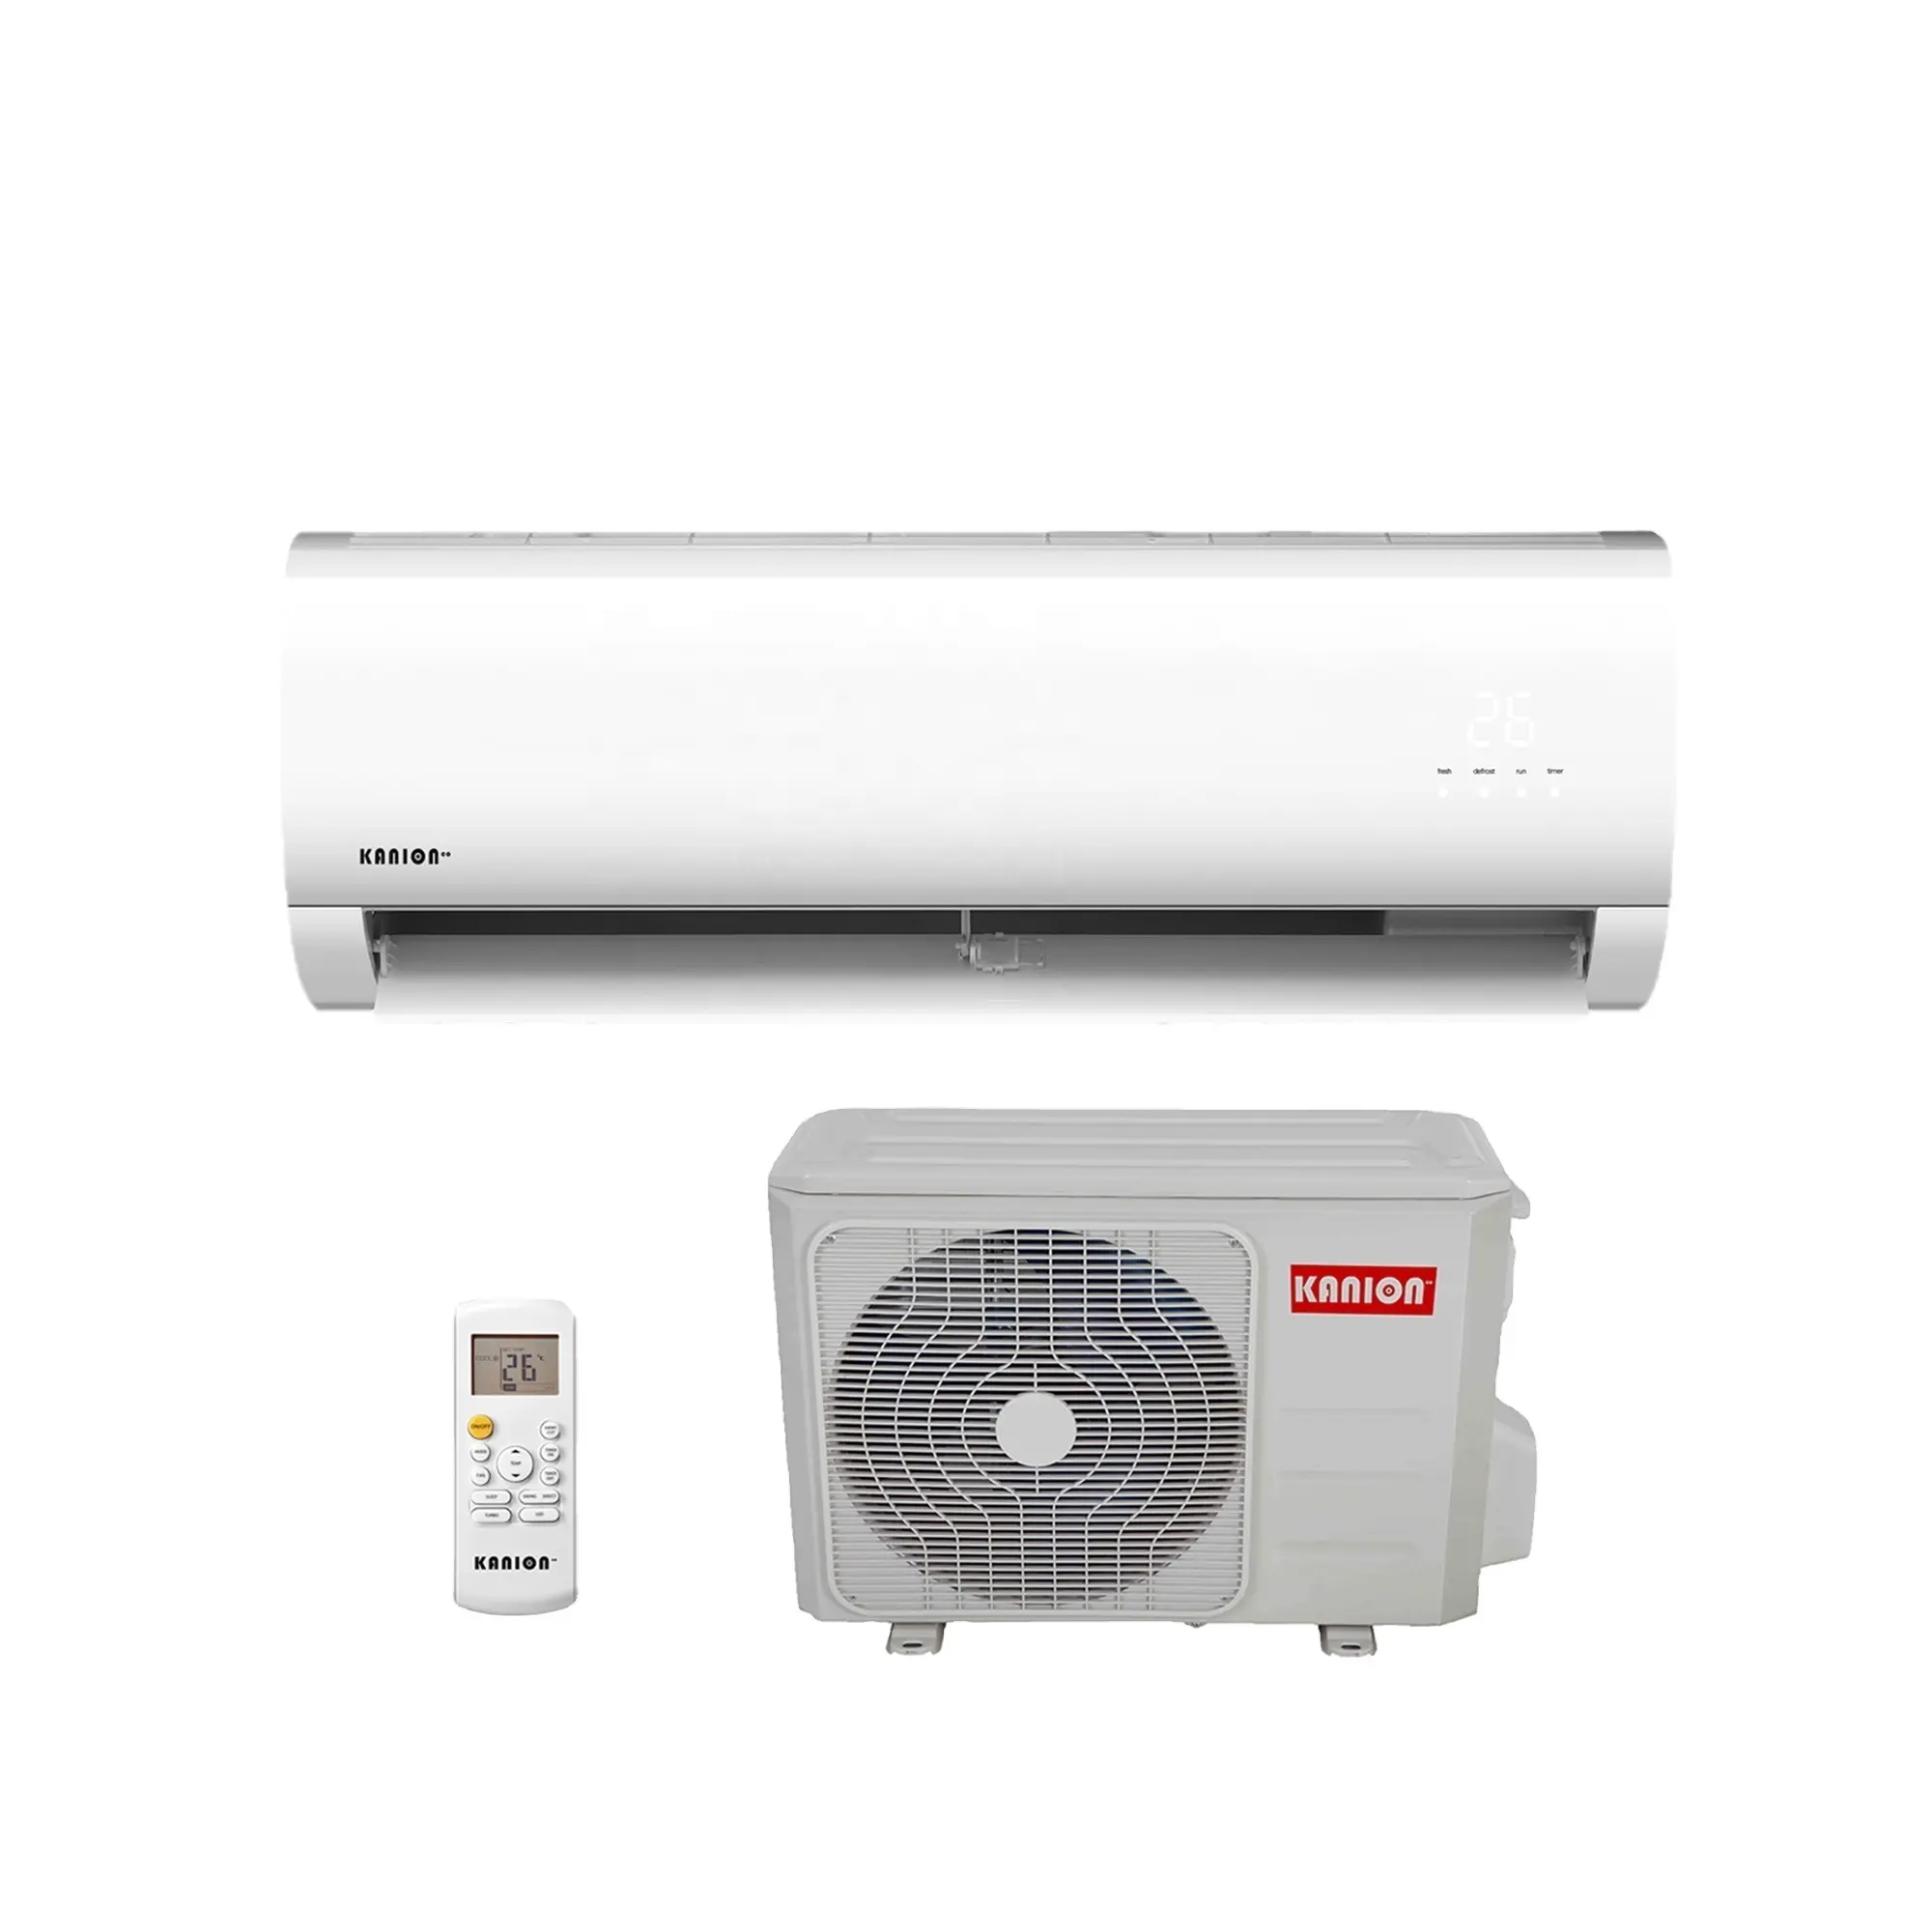 Inverter Type  9000BT  1hp  split air conditioning  cooling only  GMCC compressor  220- 240V/50hz air conditioner